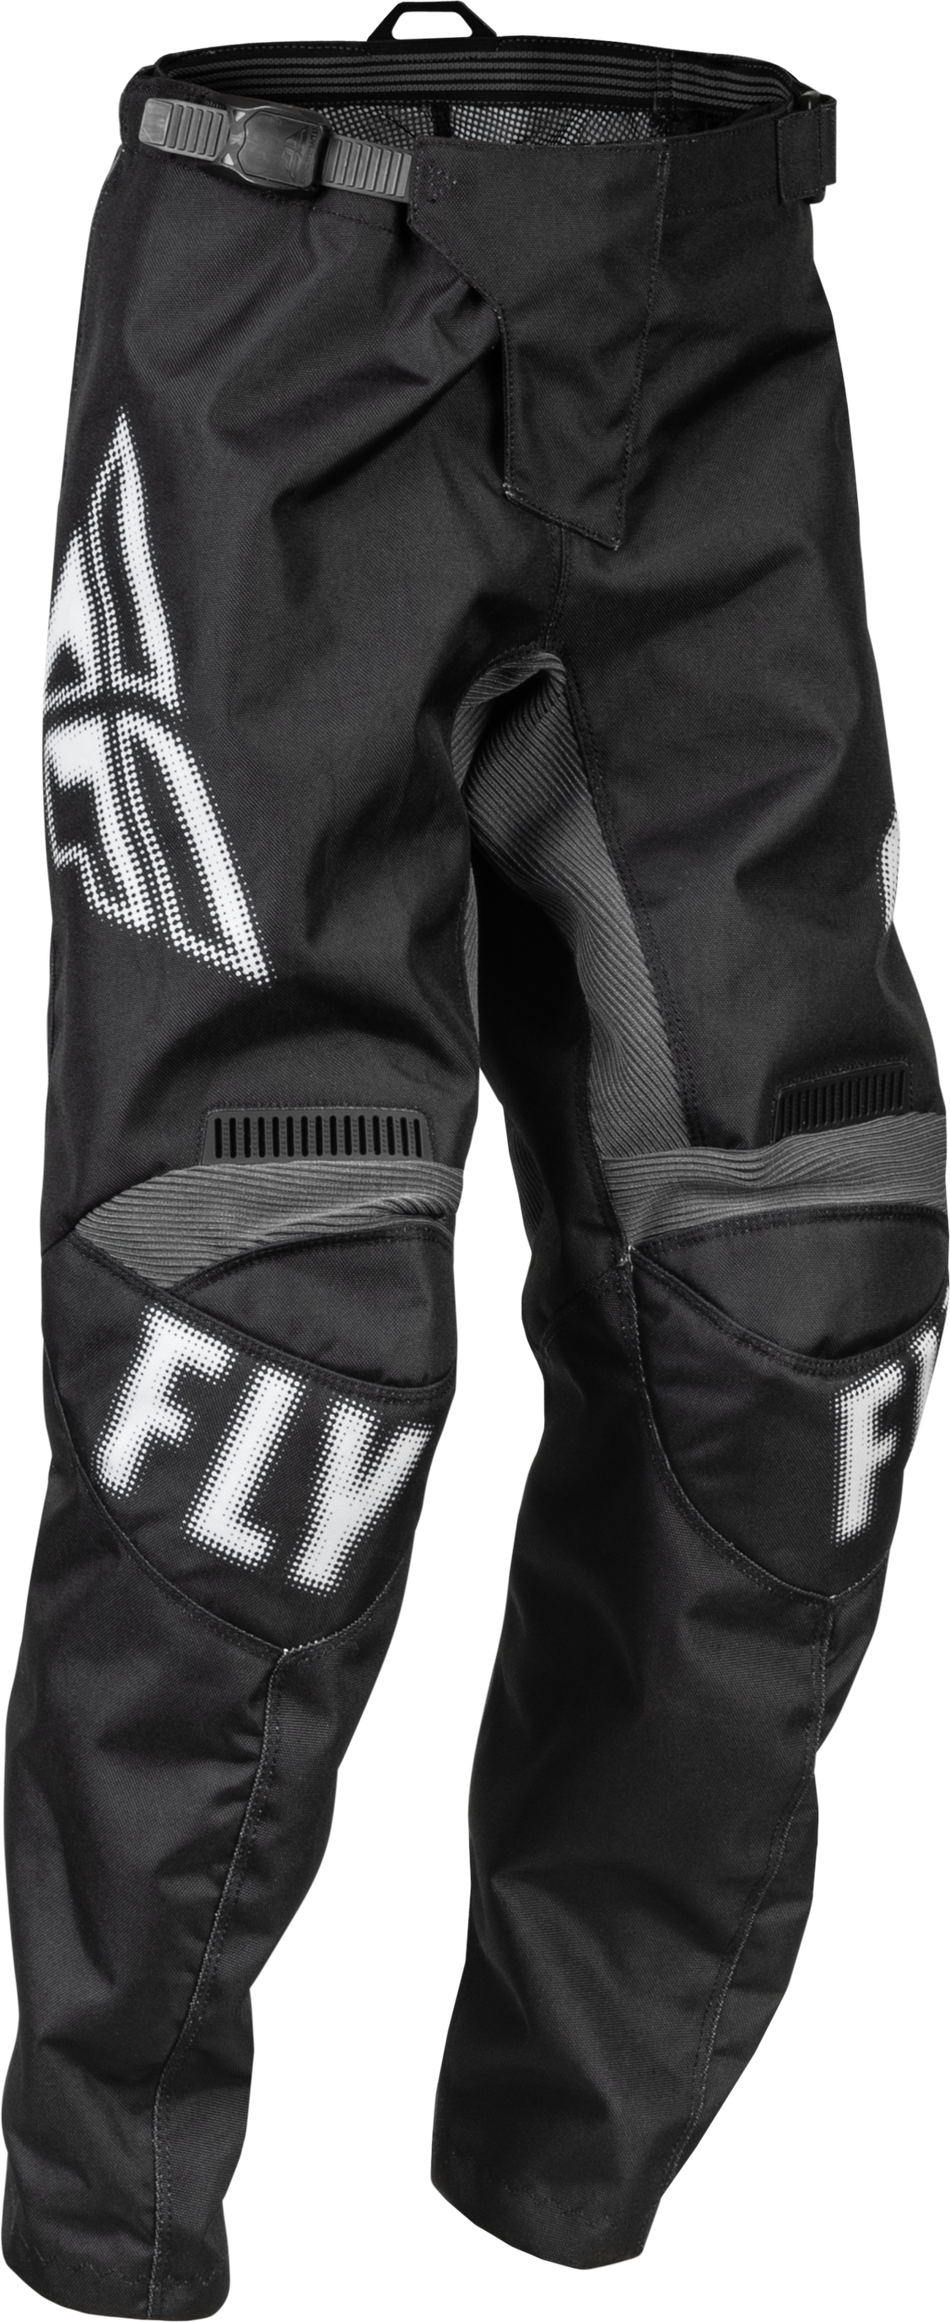 FLY RACING Youth F-16 Pants Black/White Sz 18 376-23218